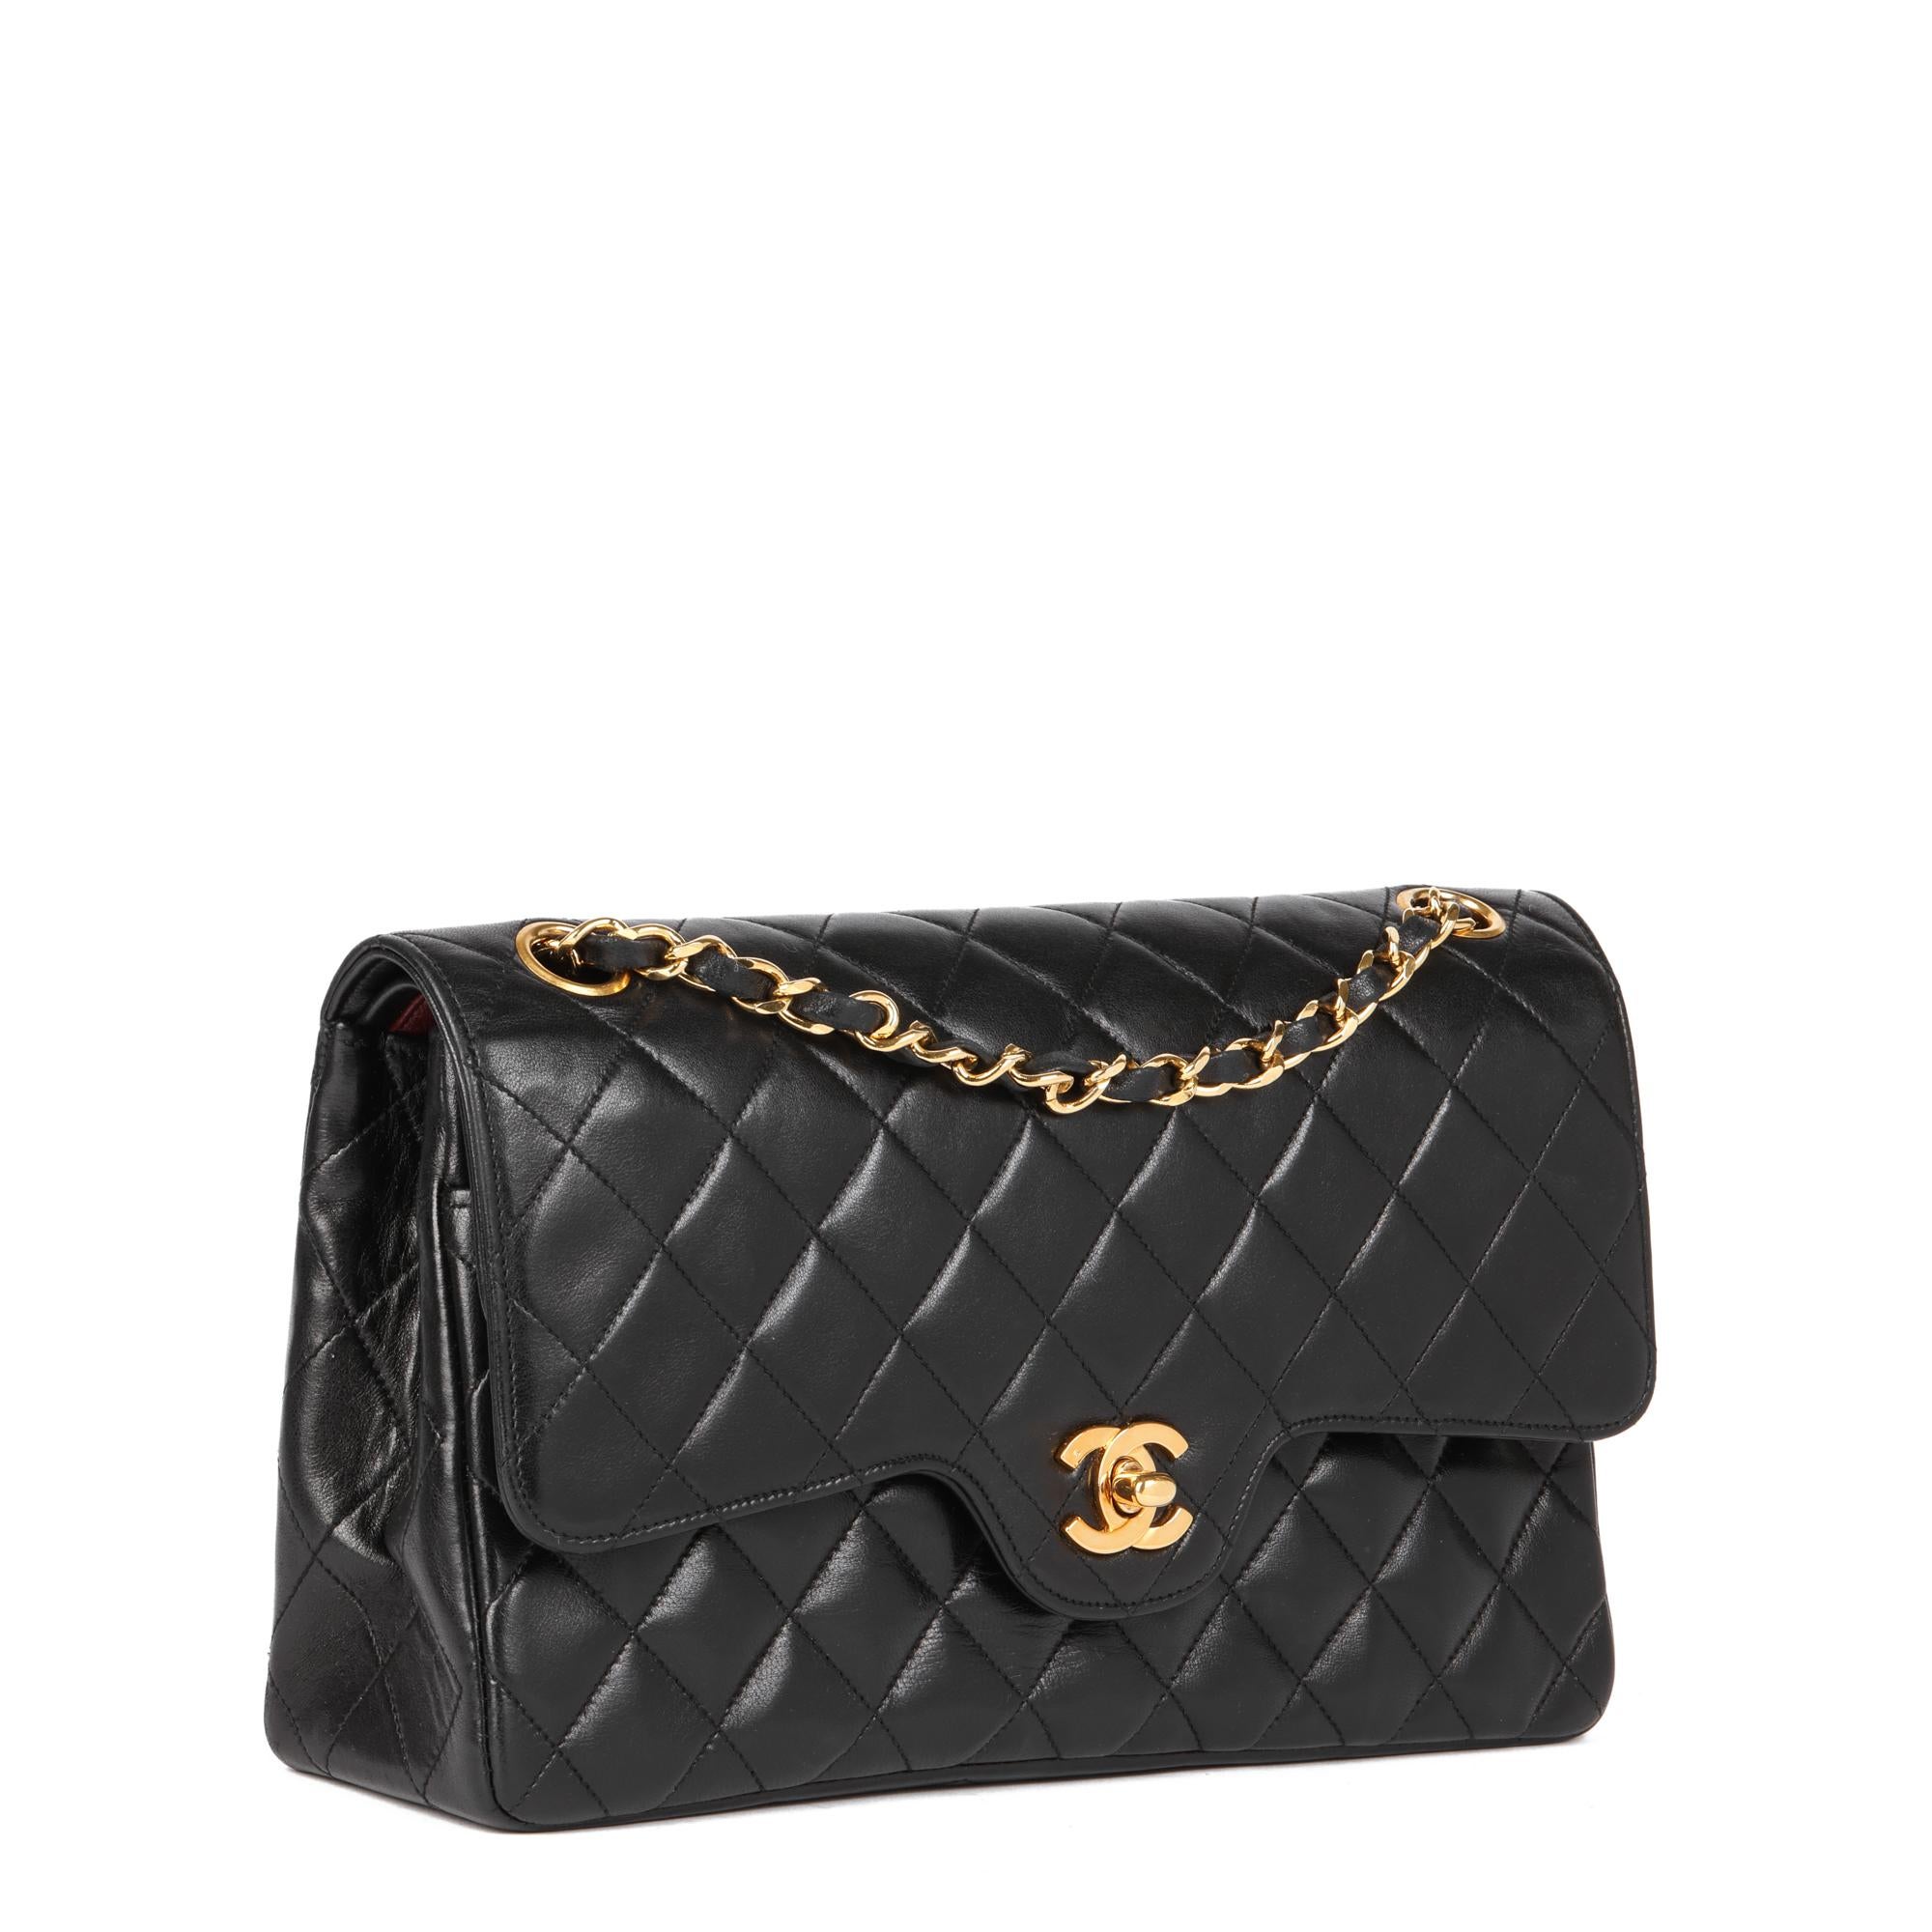 CHANEL
Black Quilted Lambskin Vintage Medium Classic Double Flap Bag

Serial Number: 1376470
Age (Circa): 1990
Accompanied By: Chanel Dust Bag, Authenticity Card
Authenticity Details: Authenticity Card, Serial Sticker (Made in France)
Gender: